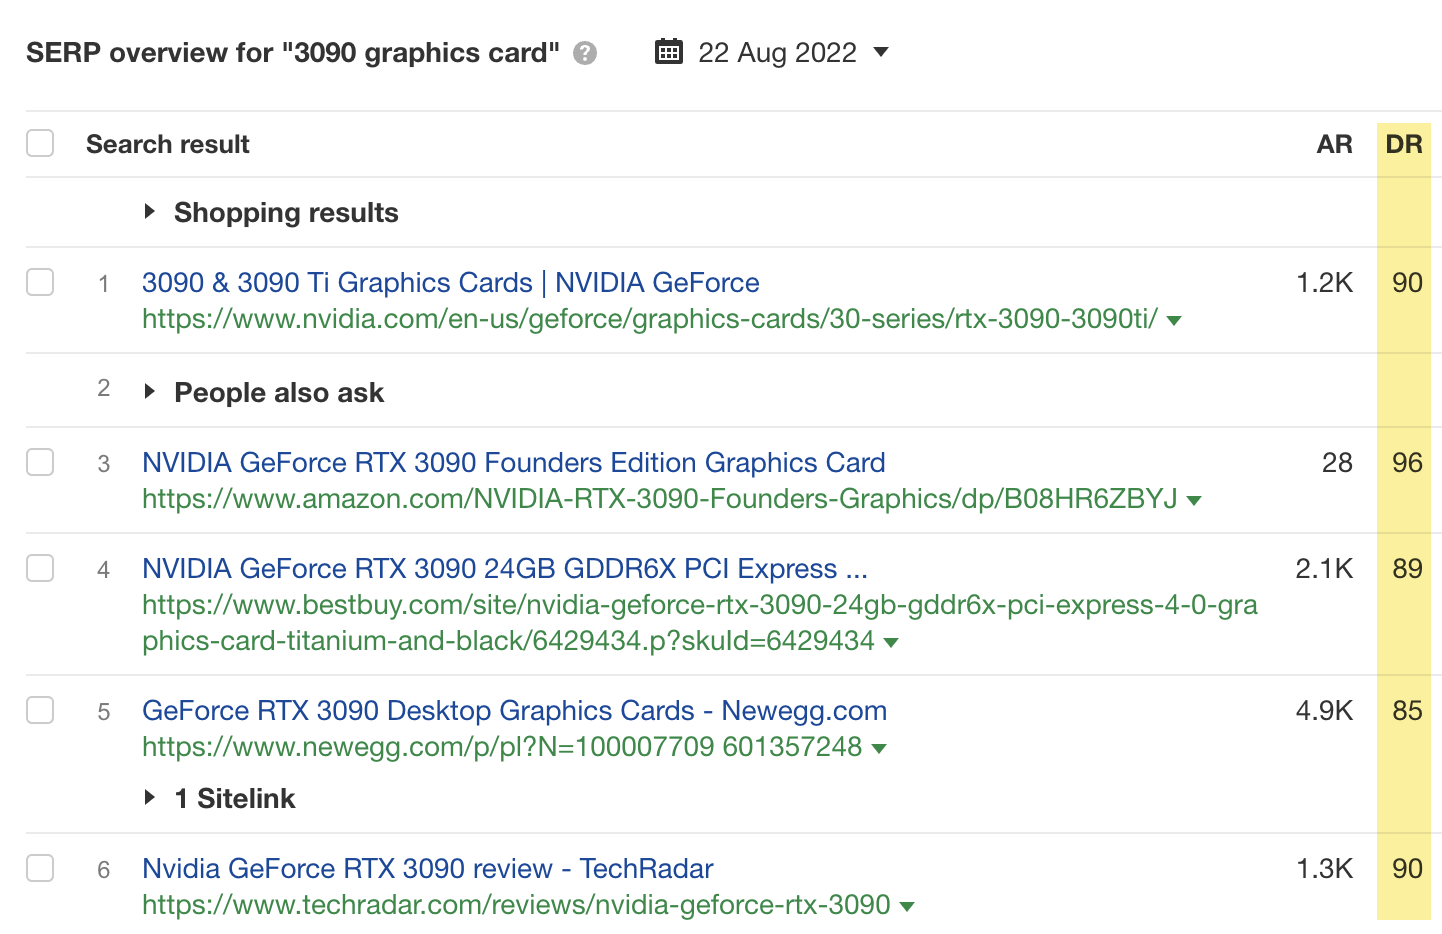 Domain Rating (DR) of the top-ranking sites for "3090 graphics card"
